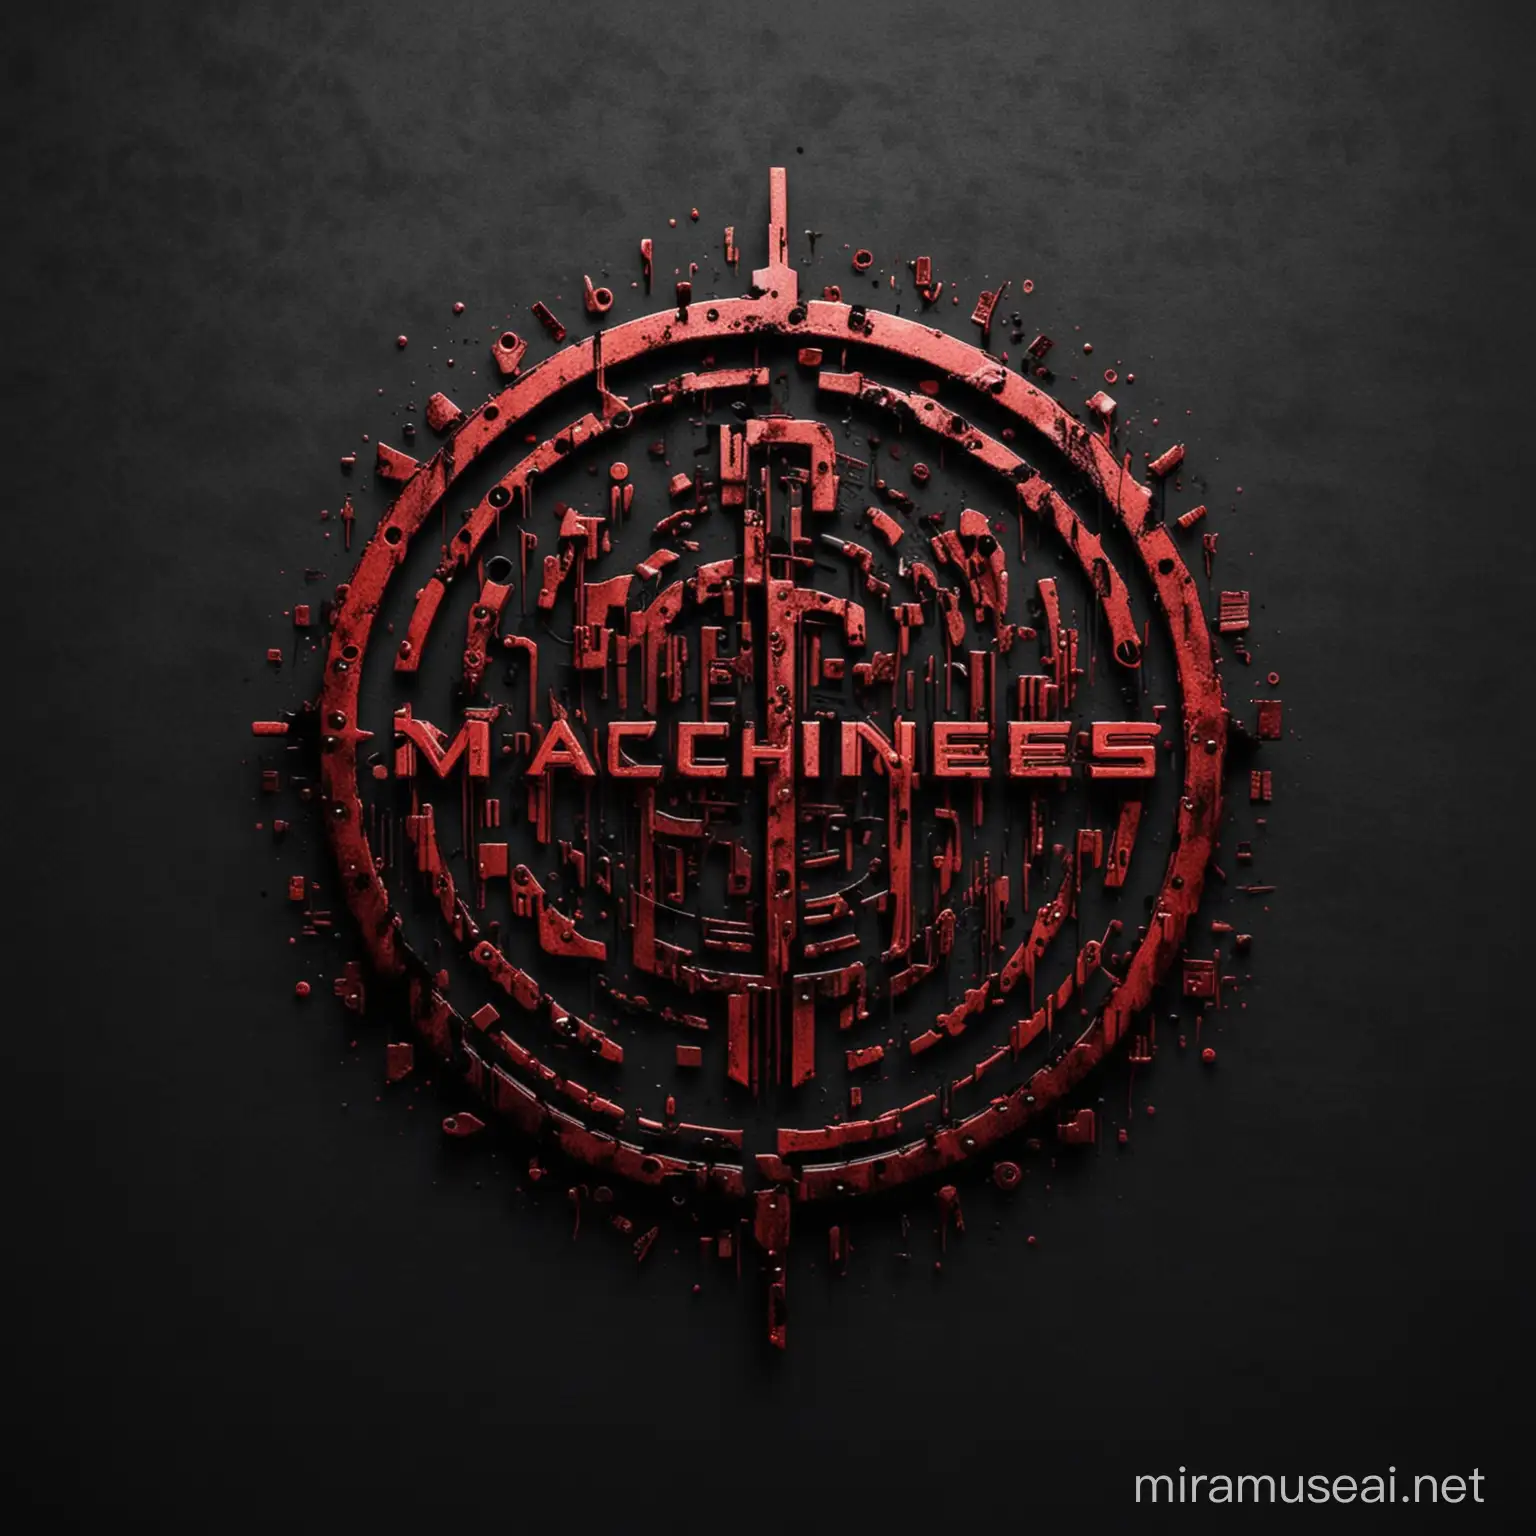 create a 2 or 3 colour logo identity for a club night called 'Machines that Bleed' which plays dark industrial electronic music